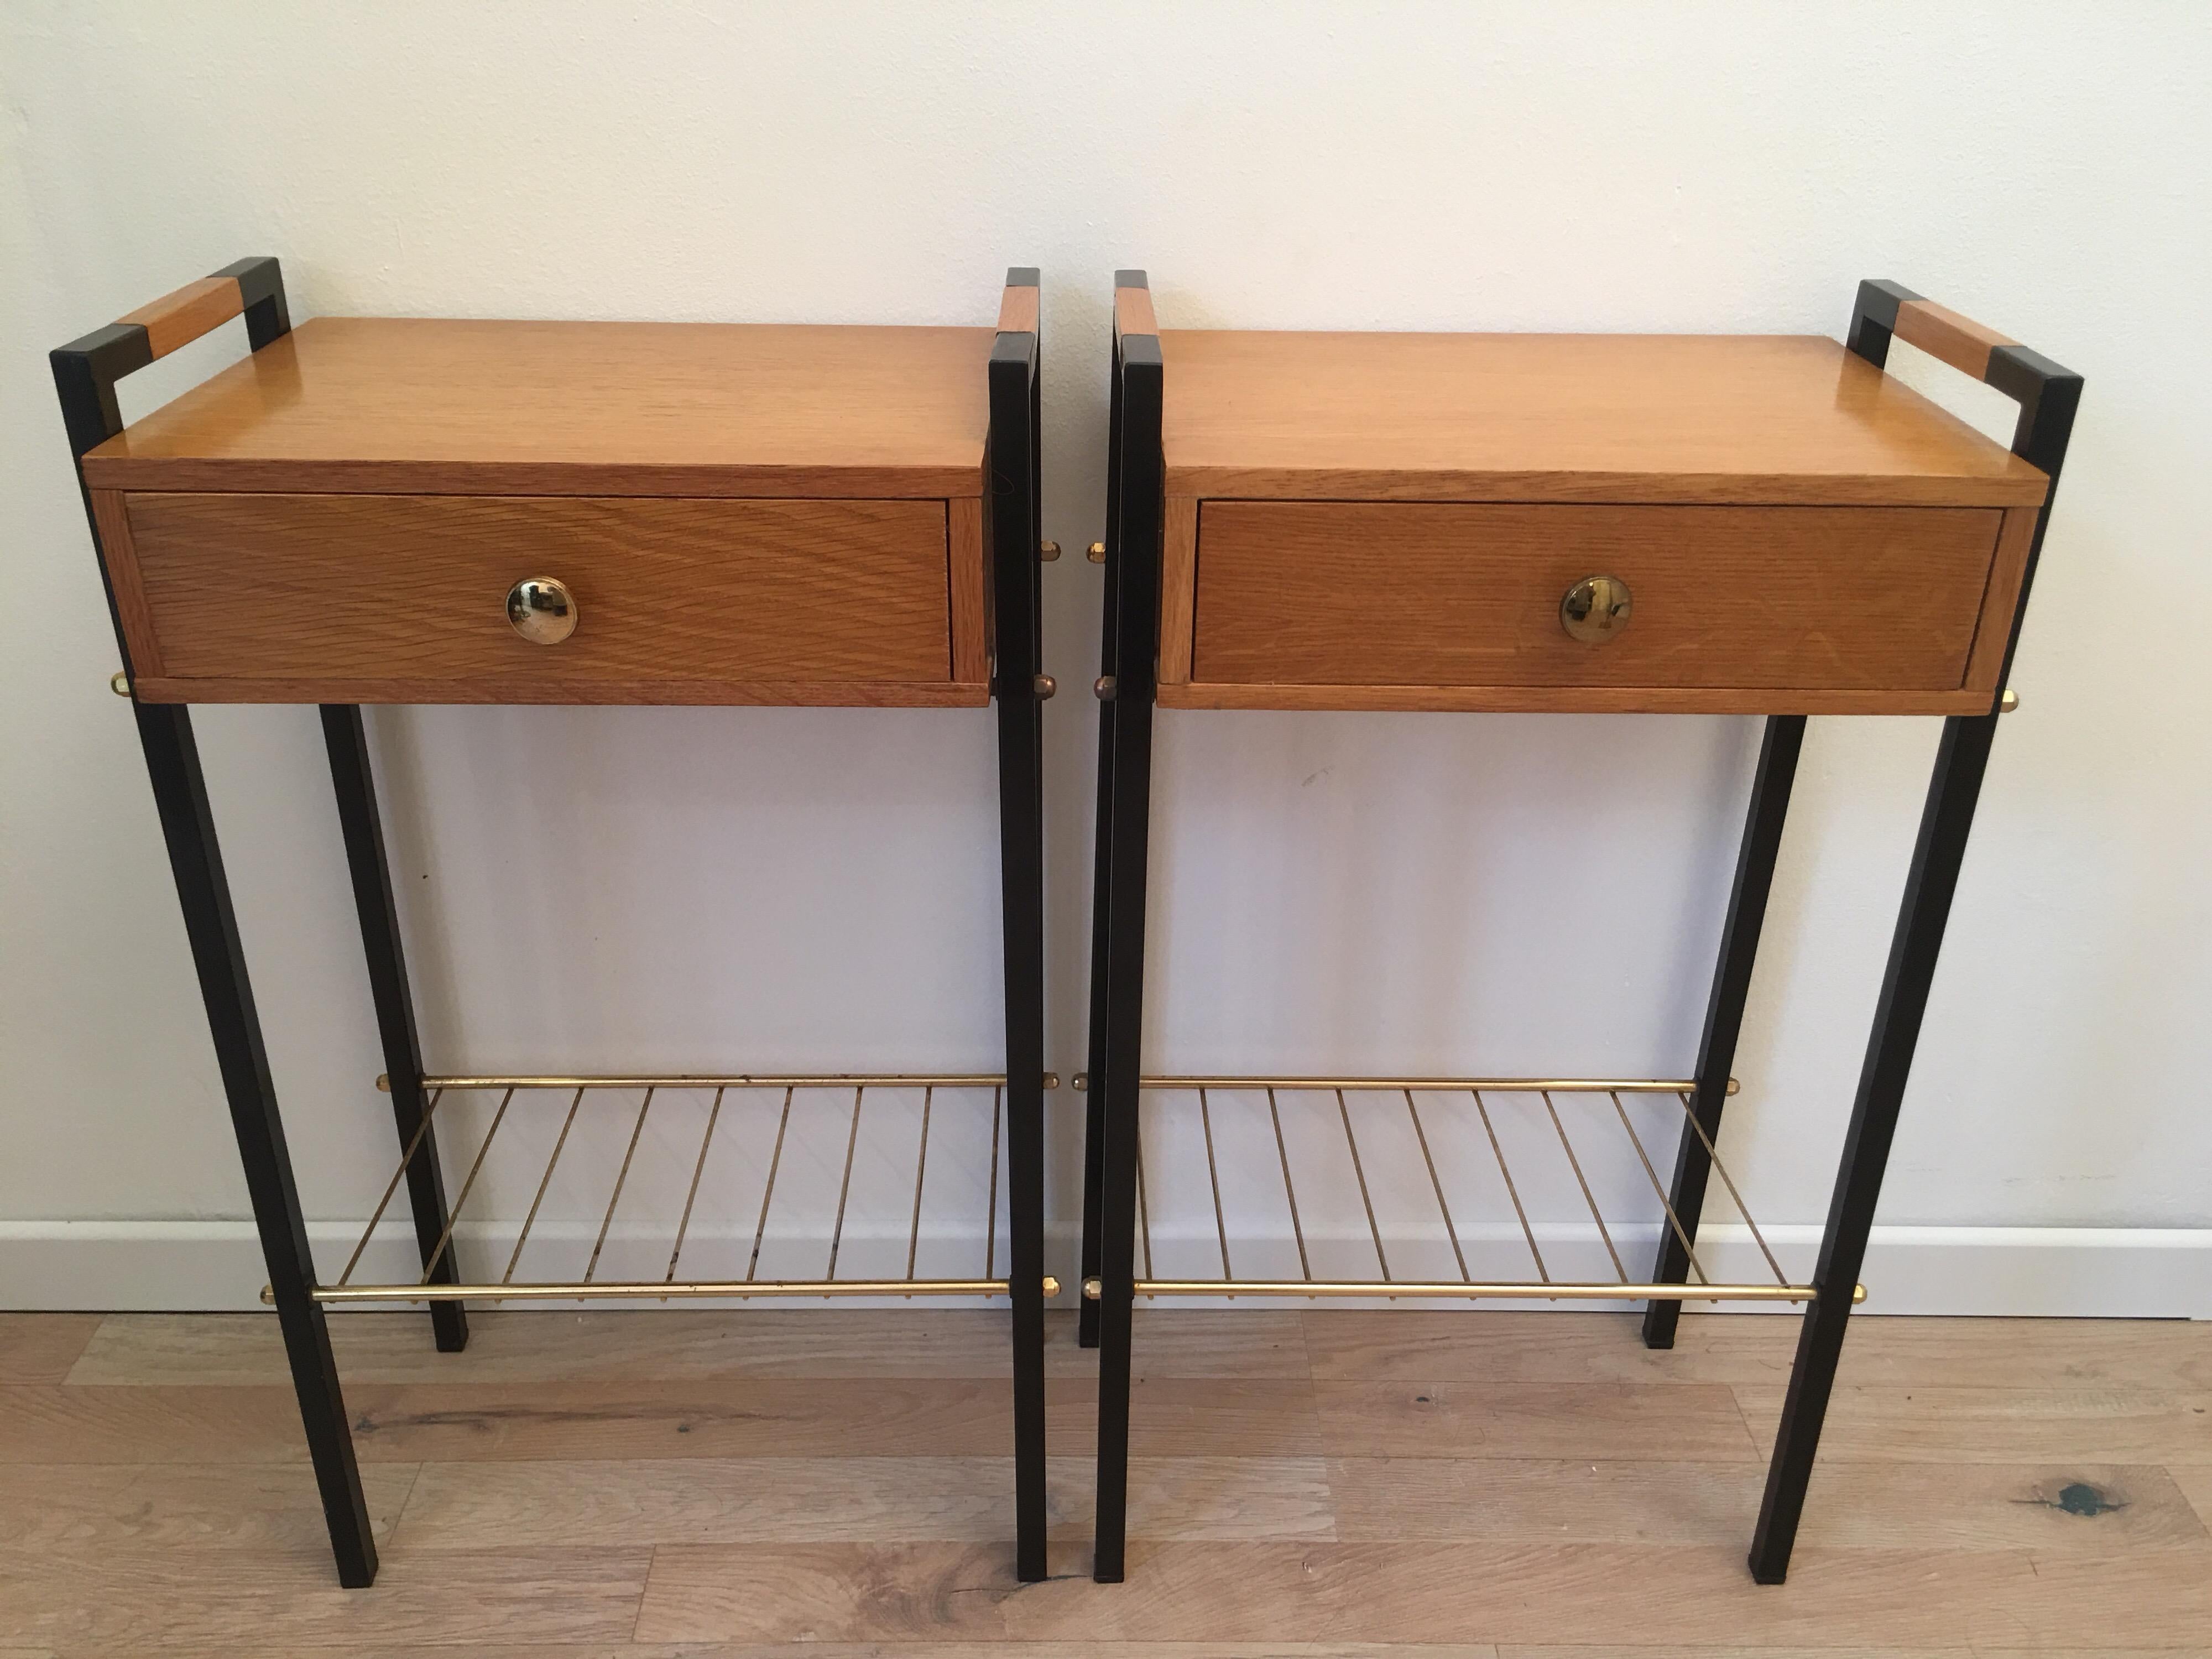 Elegant pair of bedsides made in France in the 1960s. Black metal, brass and ash veneer are characteristic of this period.
This model is similar to those of Jacques Hitier and Maxime Old. It can also serve as side tables in other rooms. In very good